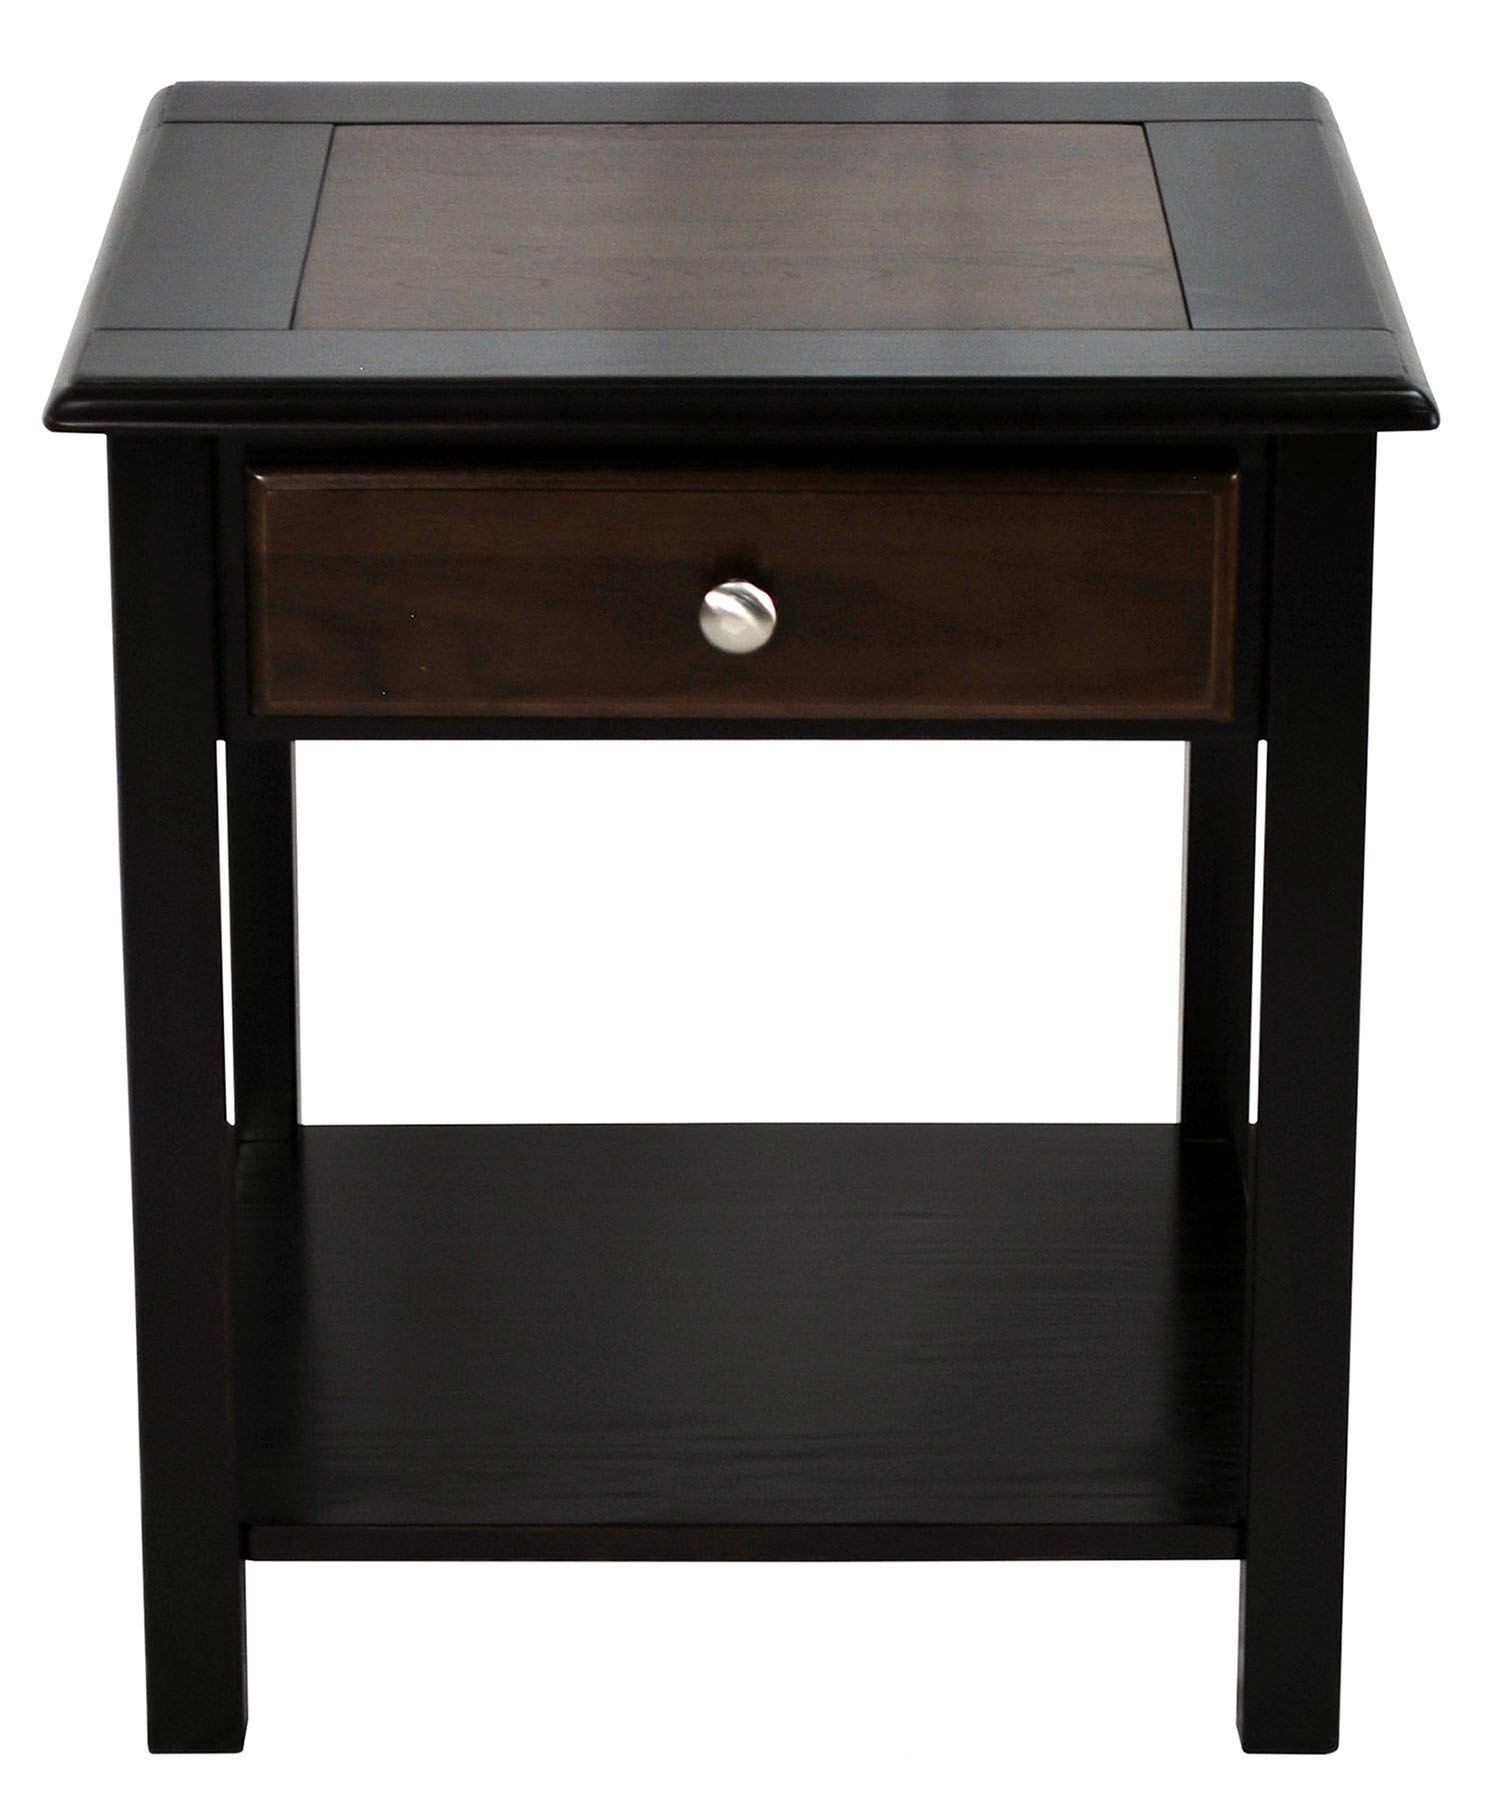 accent table end modern living room tipton round madera nogal mesas del salon muebles sala pedestal small glass knotty pine desk balcony furniture mahogany side teal storage